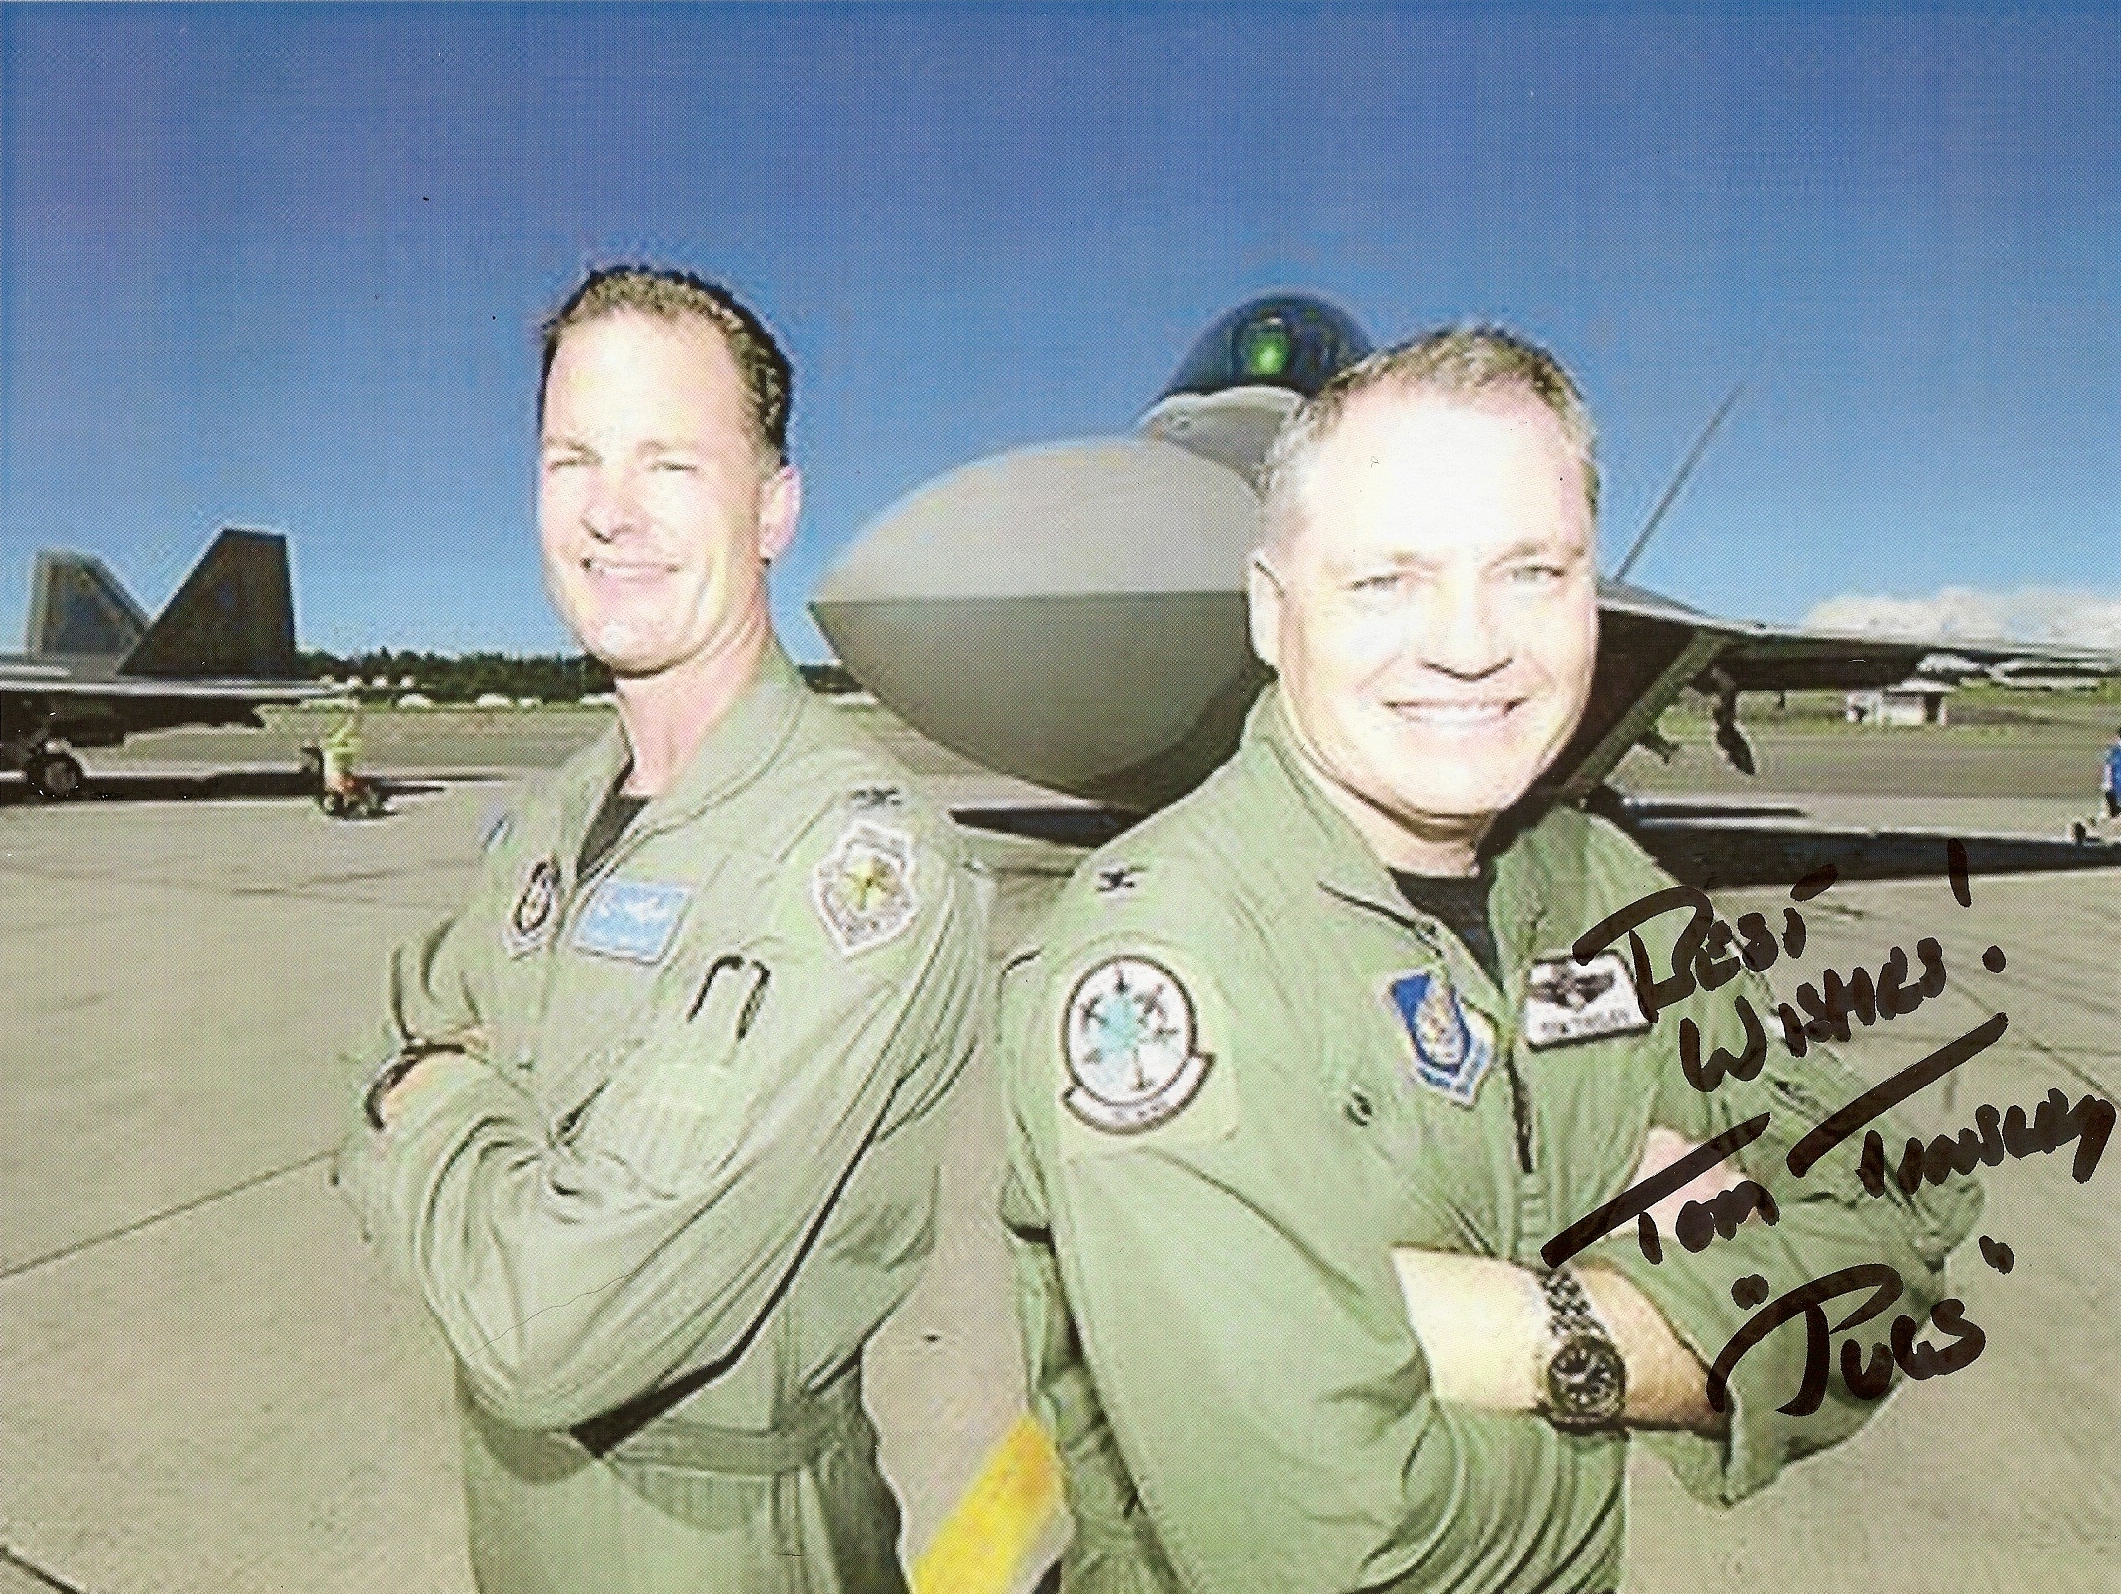 tltinsley-autographed-photo-as-colonel-usaf-001